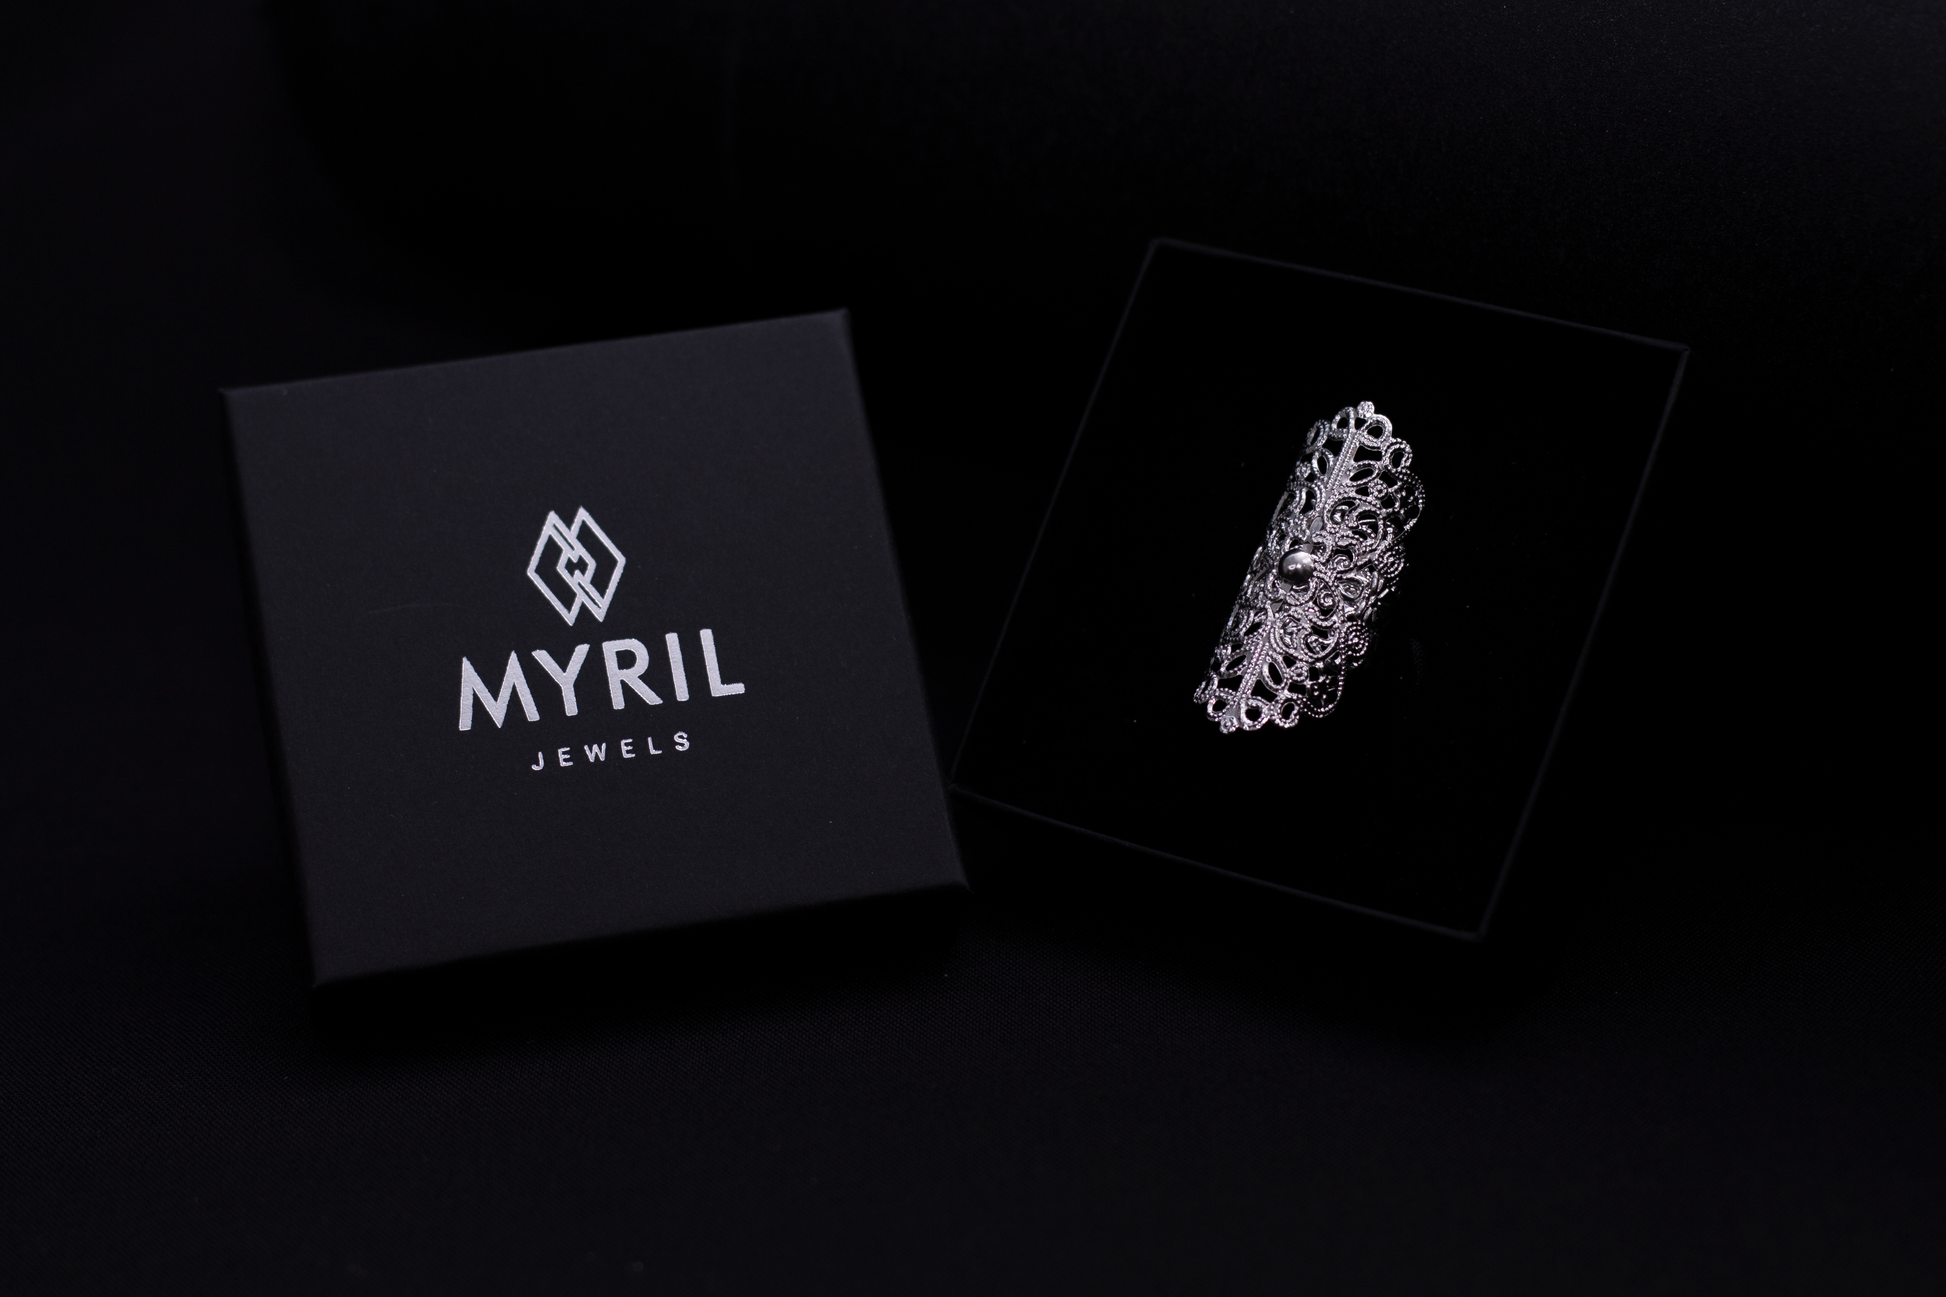 Elegant oval-shaped gothic ring from Myril Jewels, showcasing a detailed filigree design for a sophisticated neo-gothic charm. A statement piece that complements Halloween attire or everyday minimal goth style, perfect for witchcore enthusiasts or as a unique gift for the goth girlfriend.